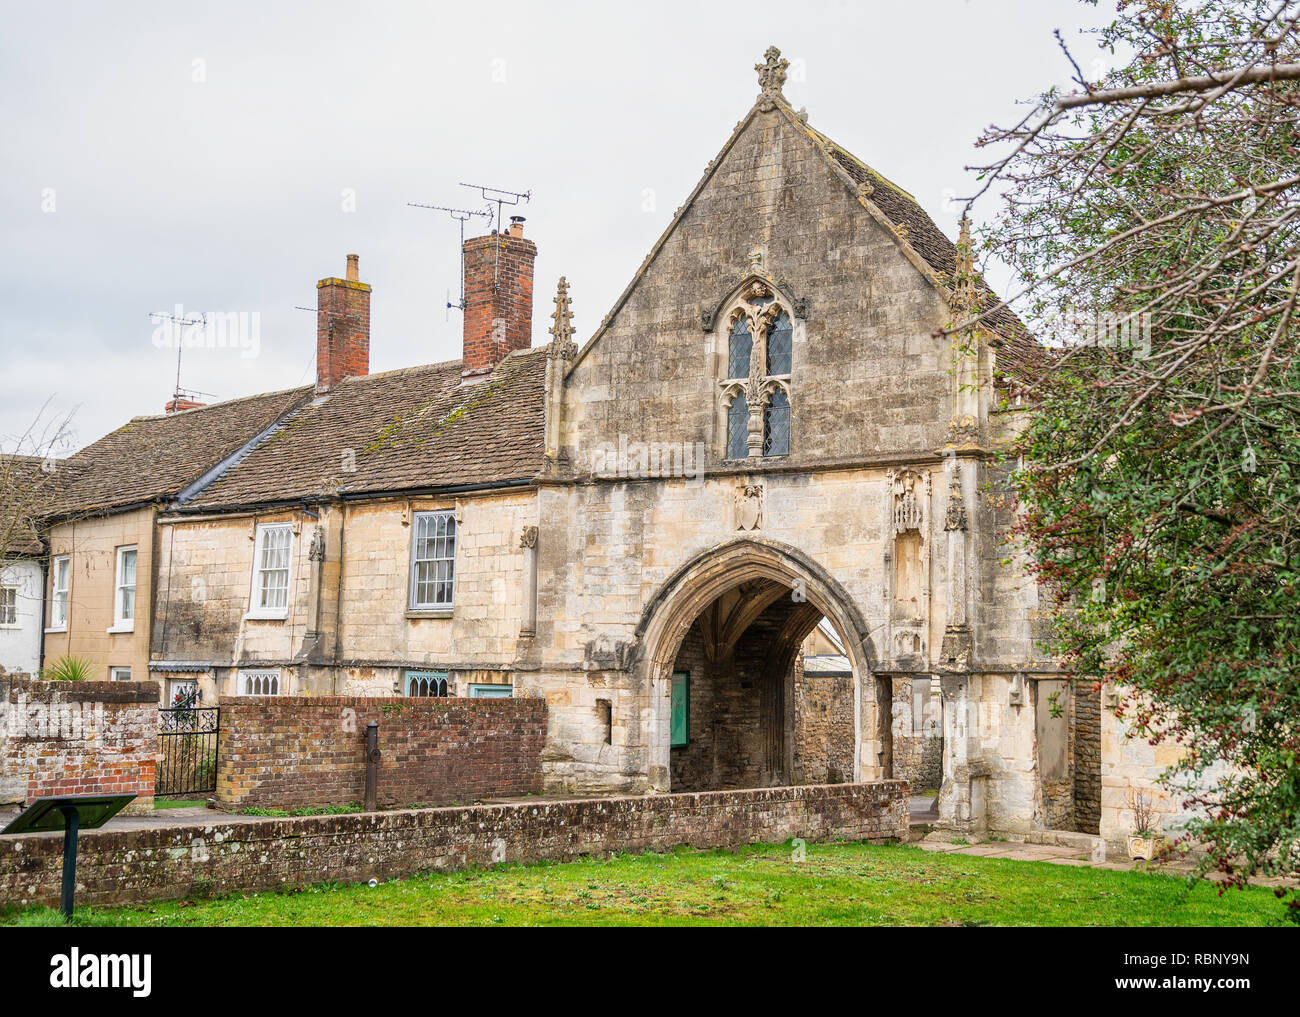 Kingswood Abbey Gateway, Kingswood, Gloucestershire, United Kingdom. All that remains of a Cistercian Abbey. Stock Photo